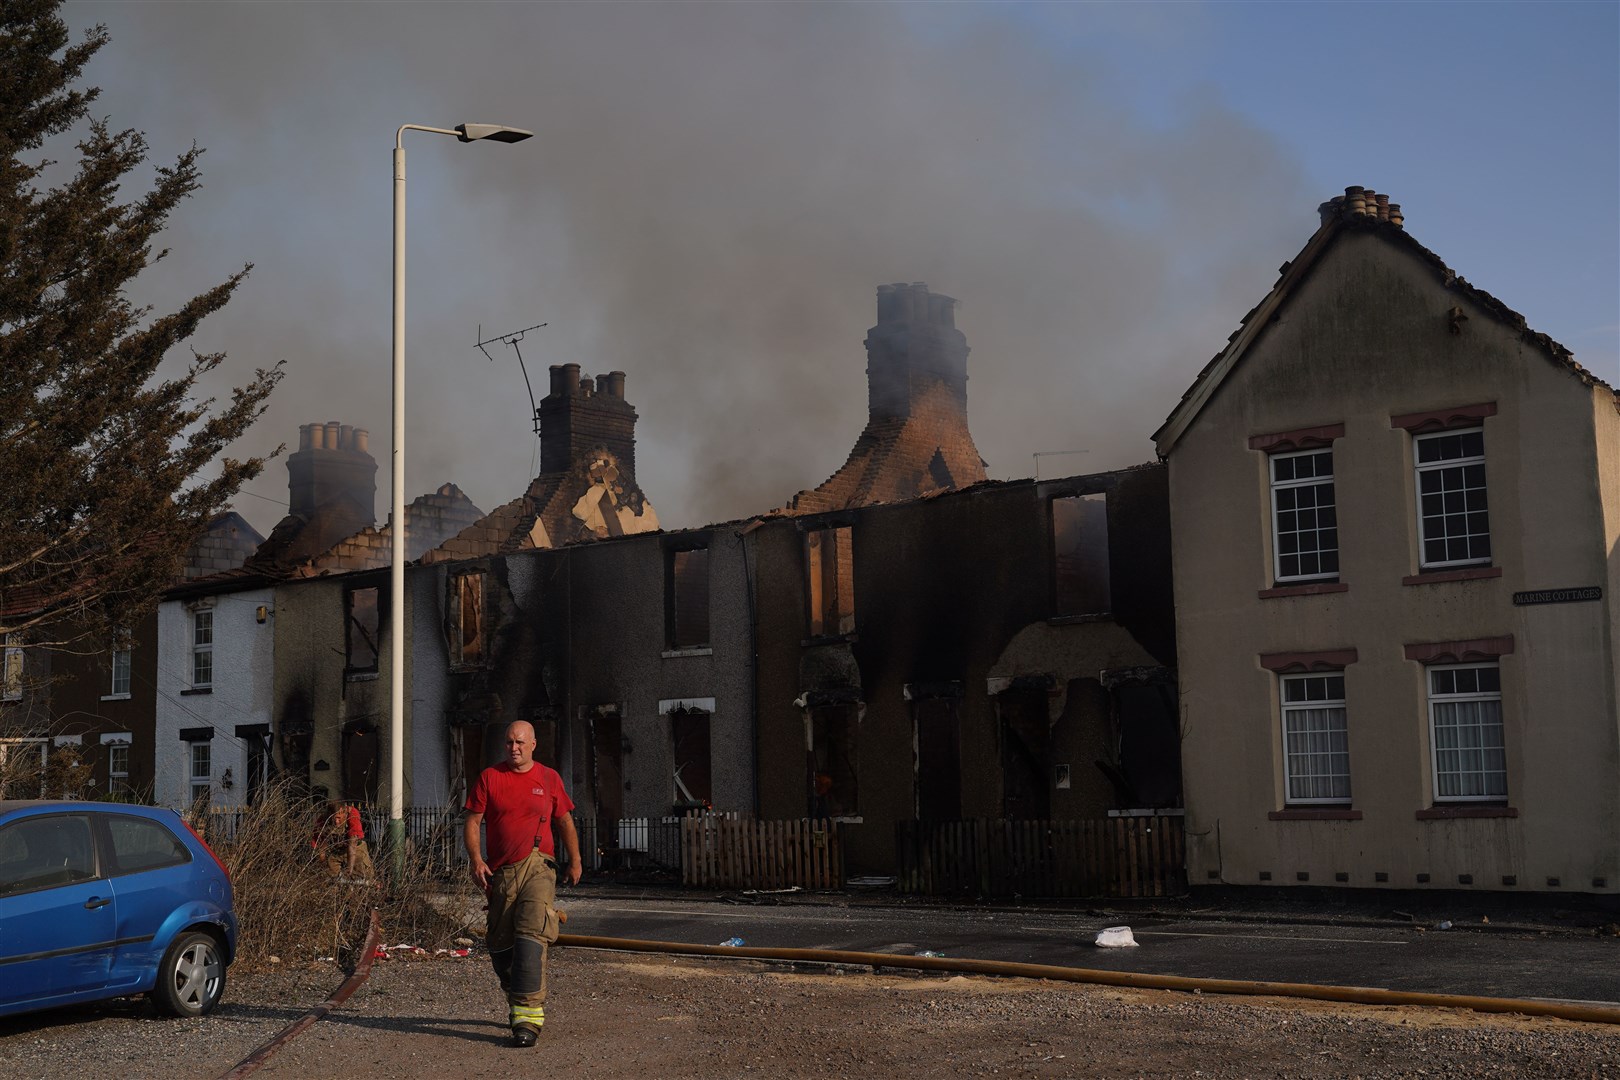 Firefighters at the scene of a blaze in the village of Wennington (Yui Mok/PA)